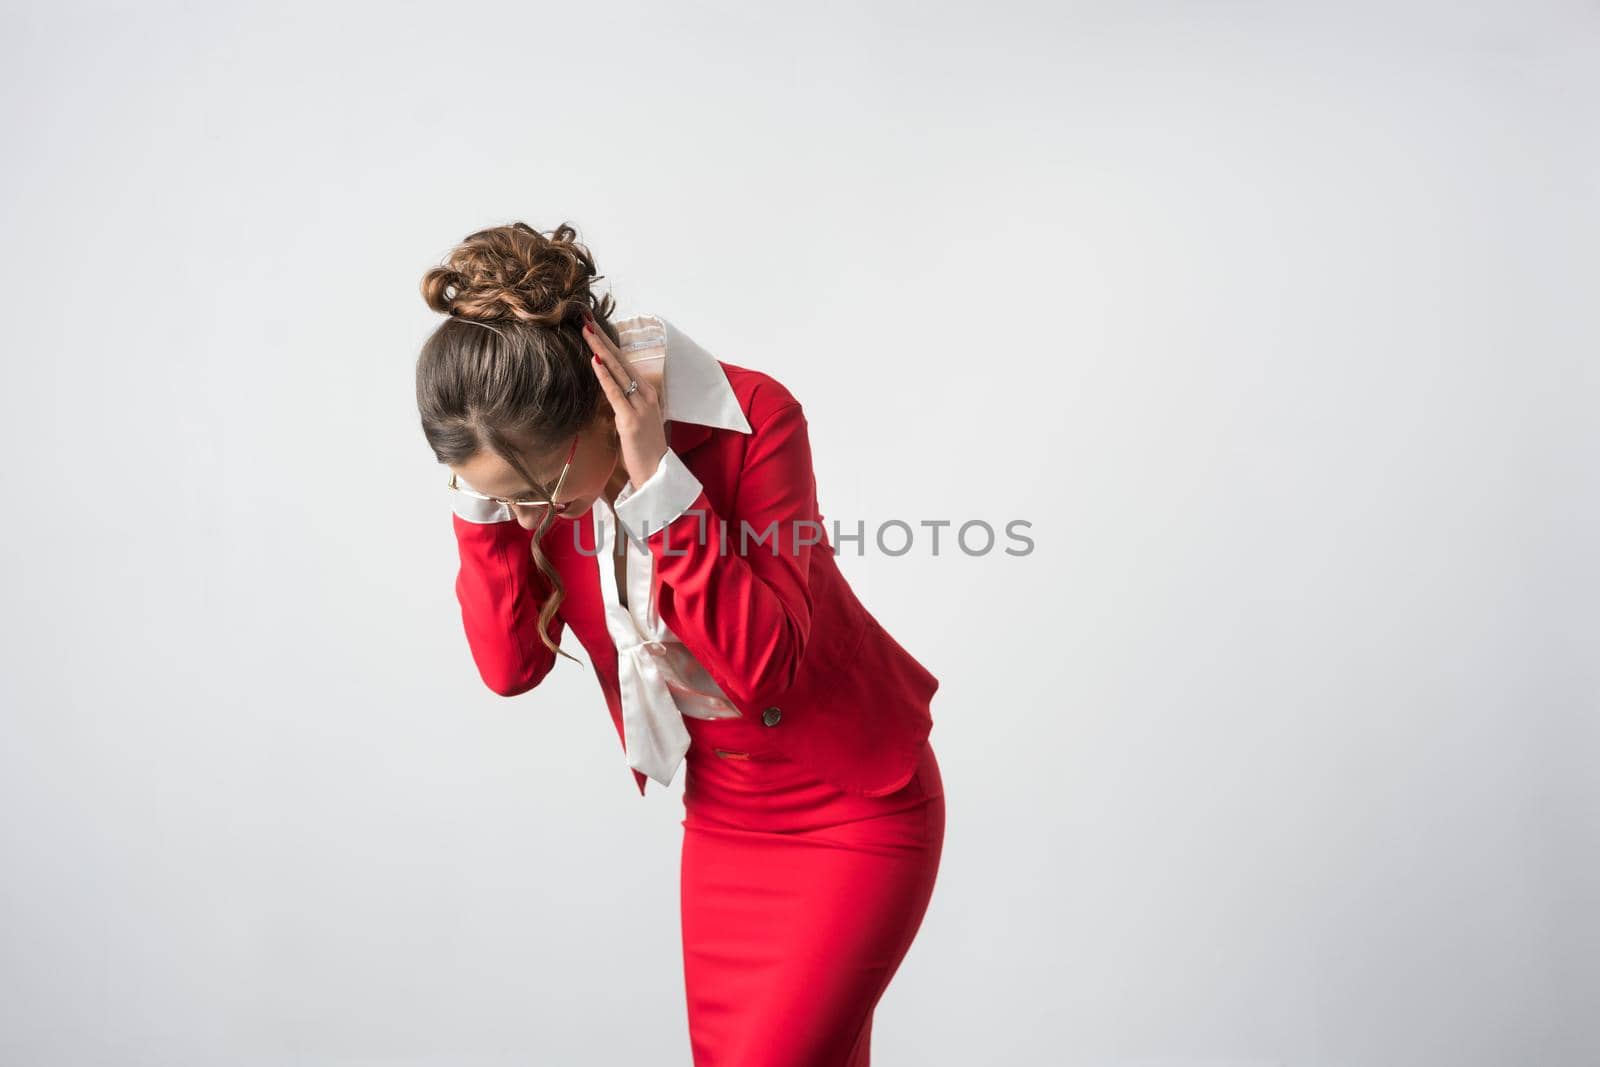 Businesswoman cannot take it anymore covering herself